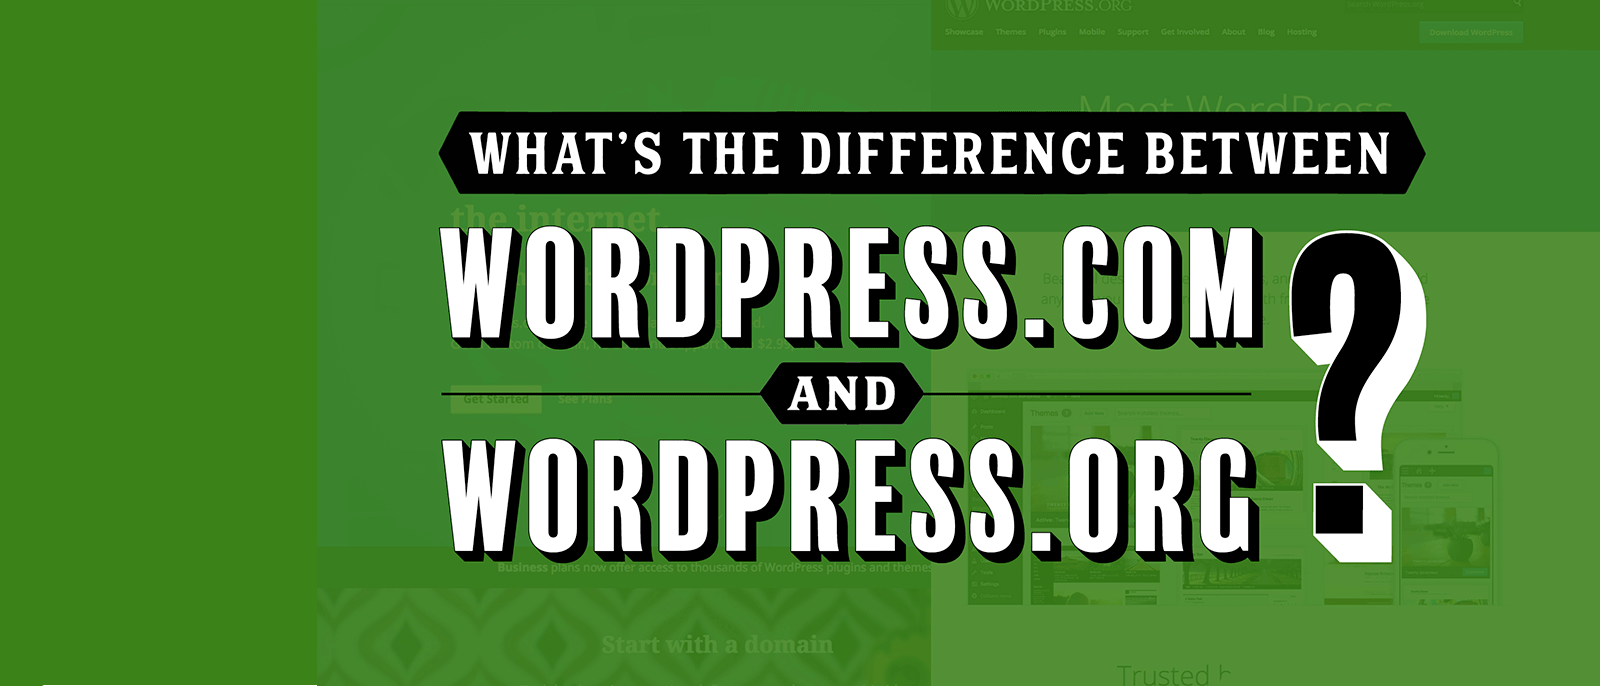 What is the Difference Between WordPress.com and WordPress.org - YouTube Video